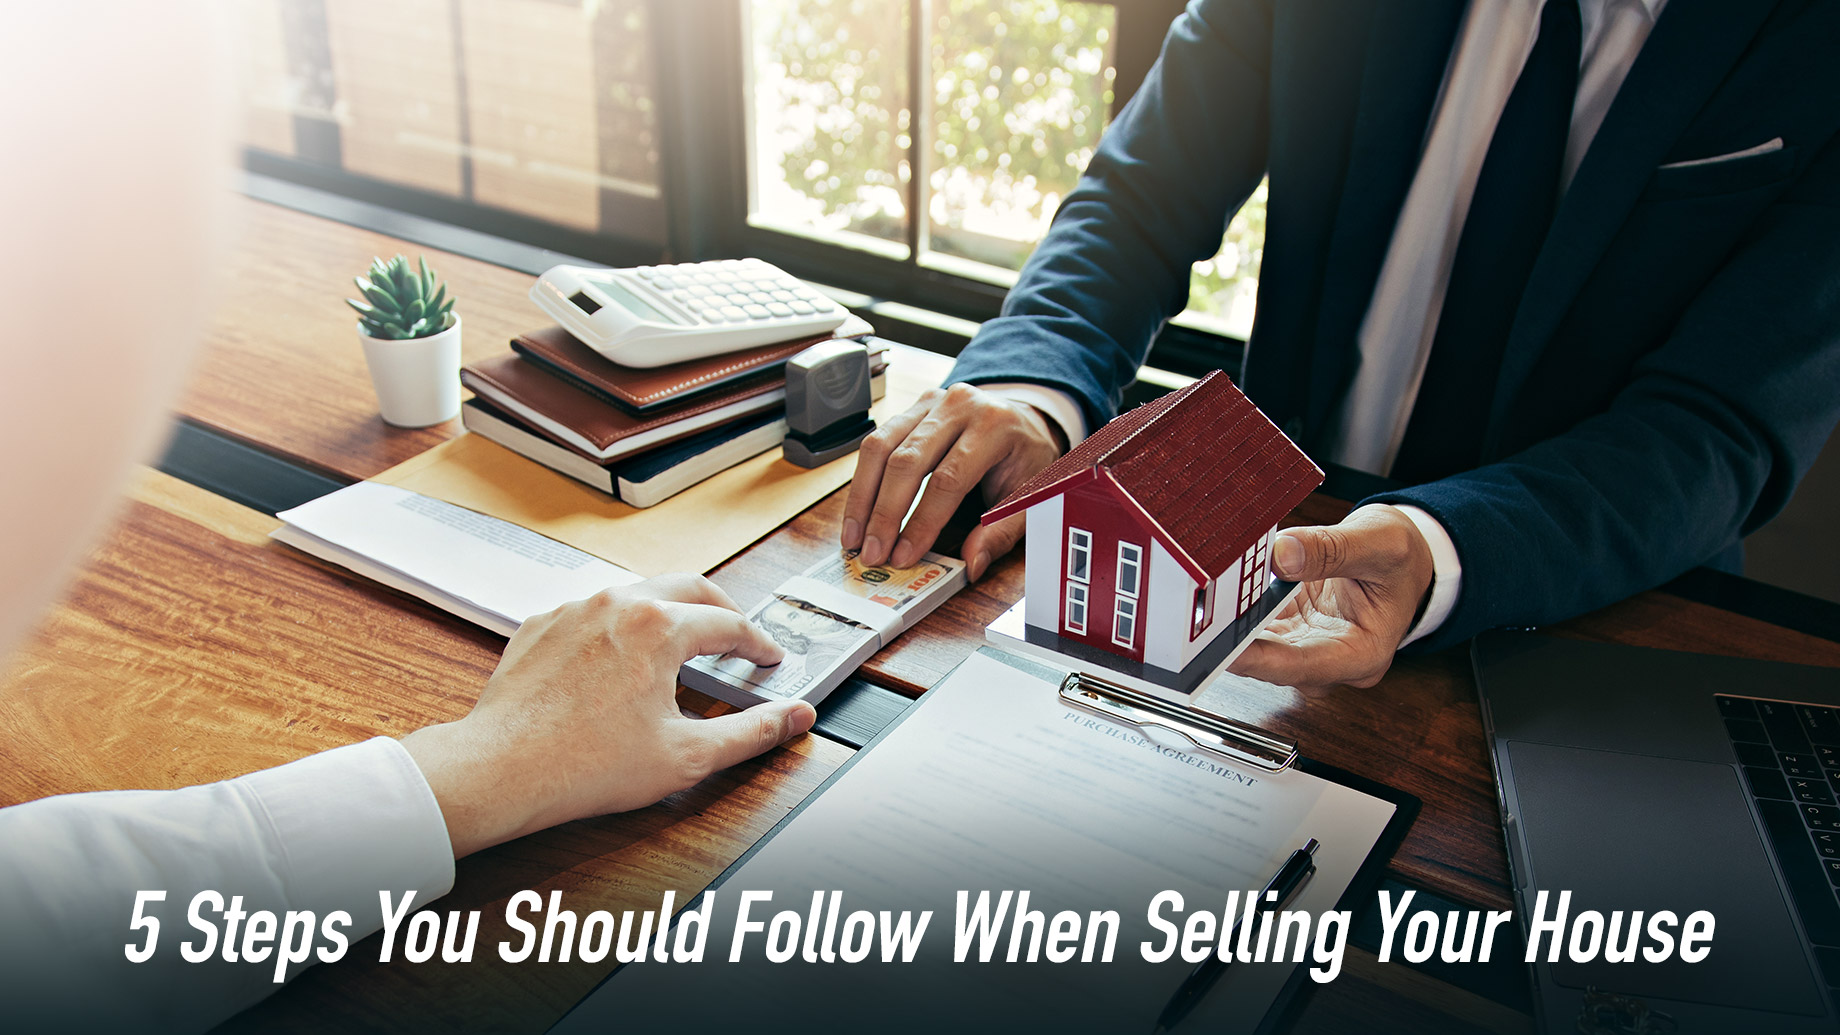 5 Steps You Should Follow When Selling Your House